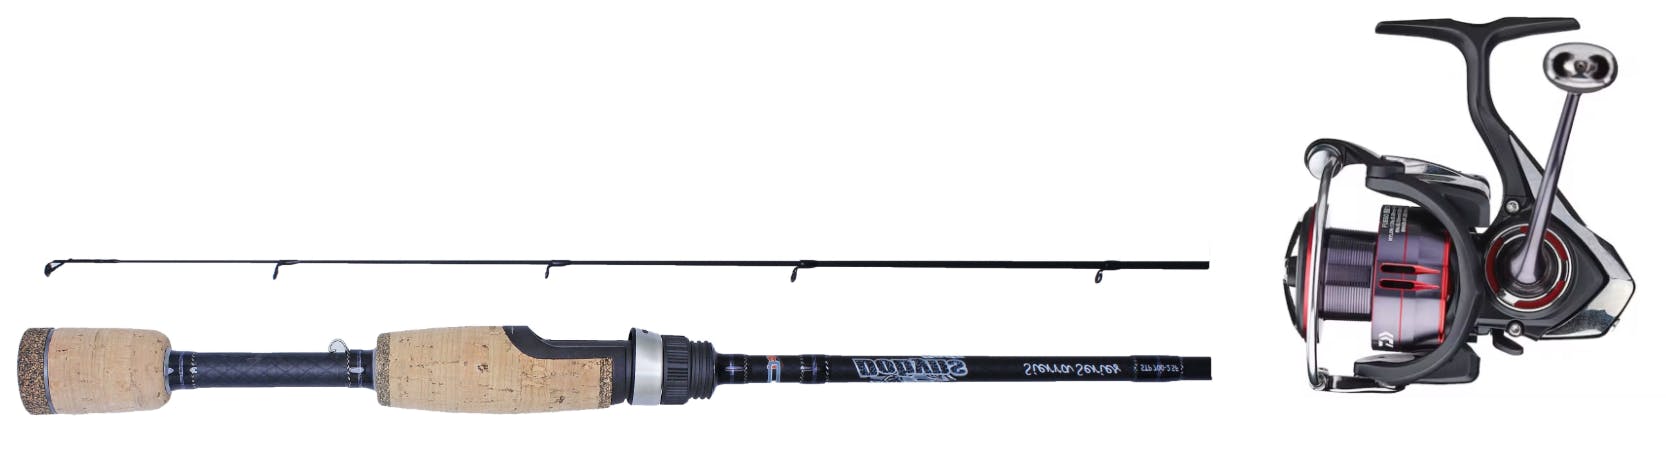 The Best Panfish Setups for Every Budget